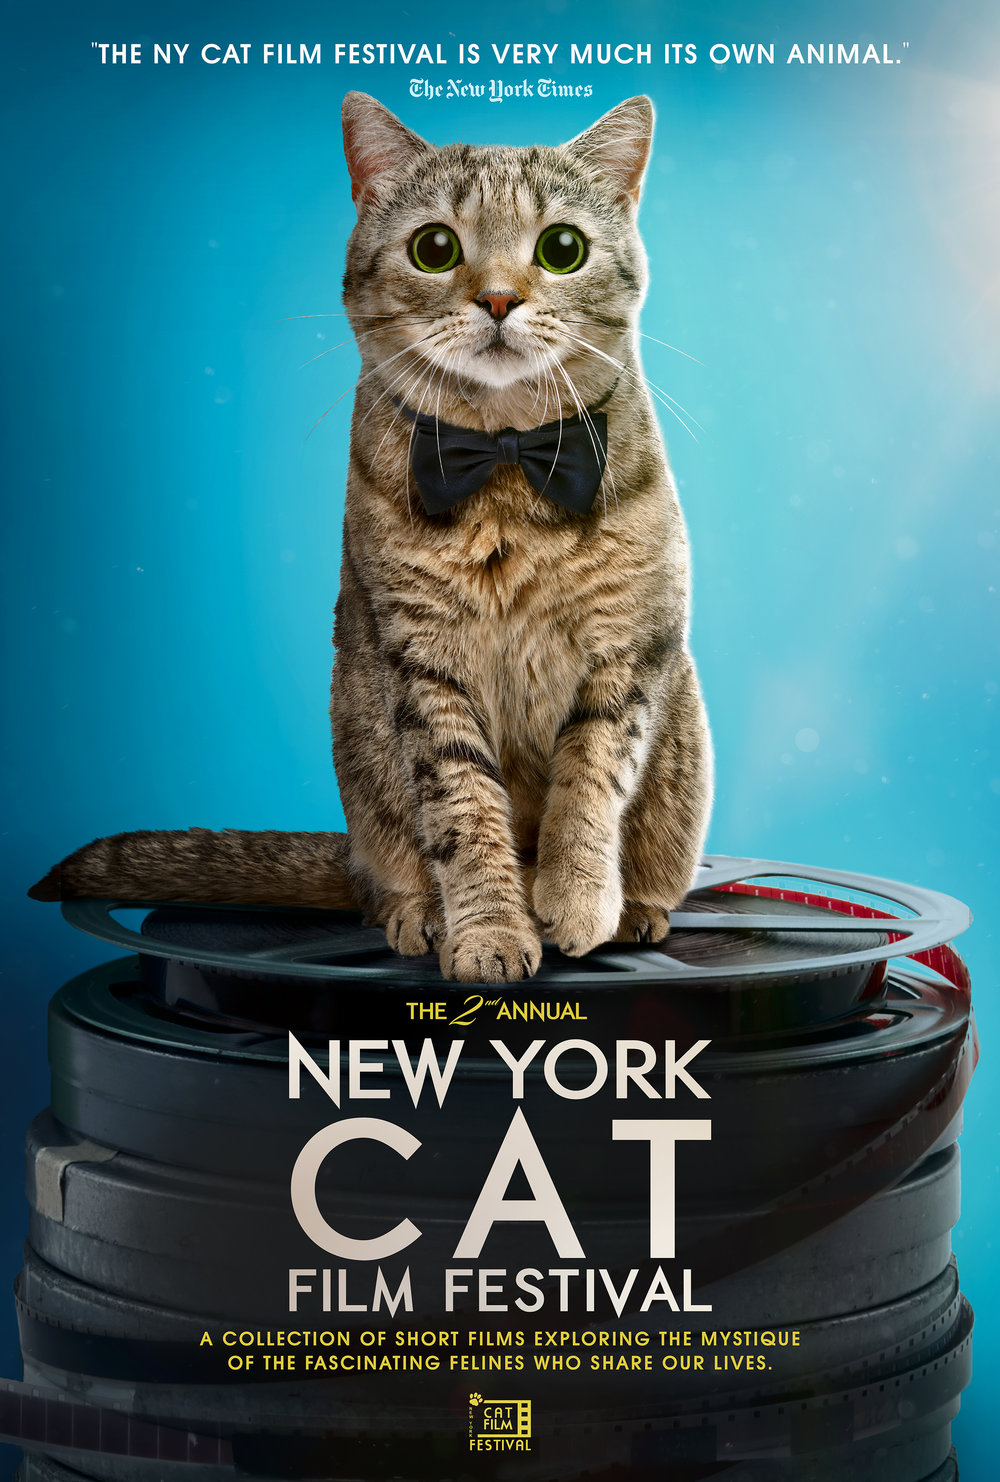 Showtime for New York Cat Film Festival playing Aug 8th, 2019 at 700